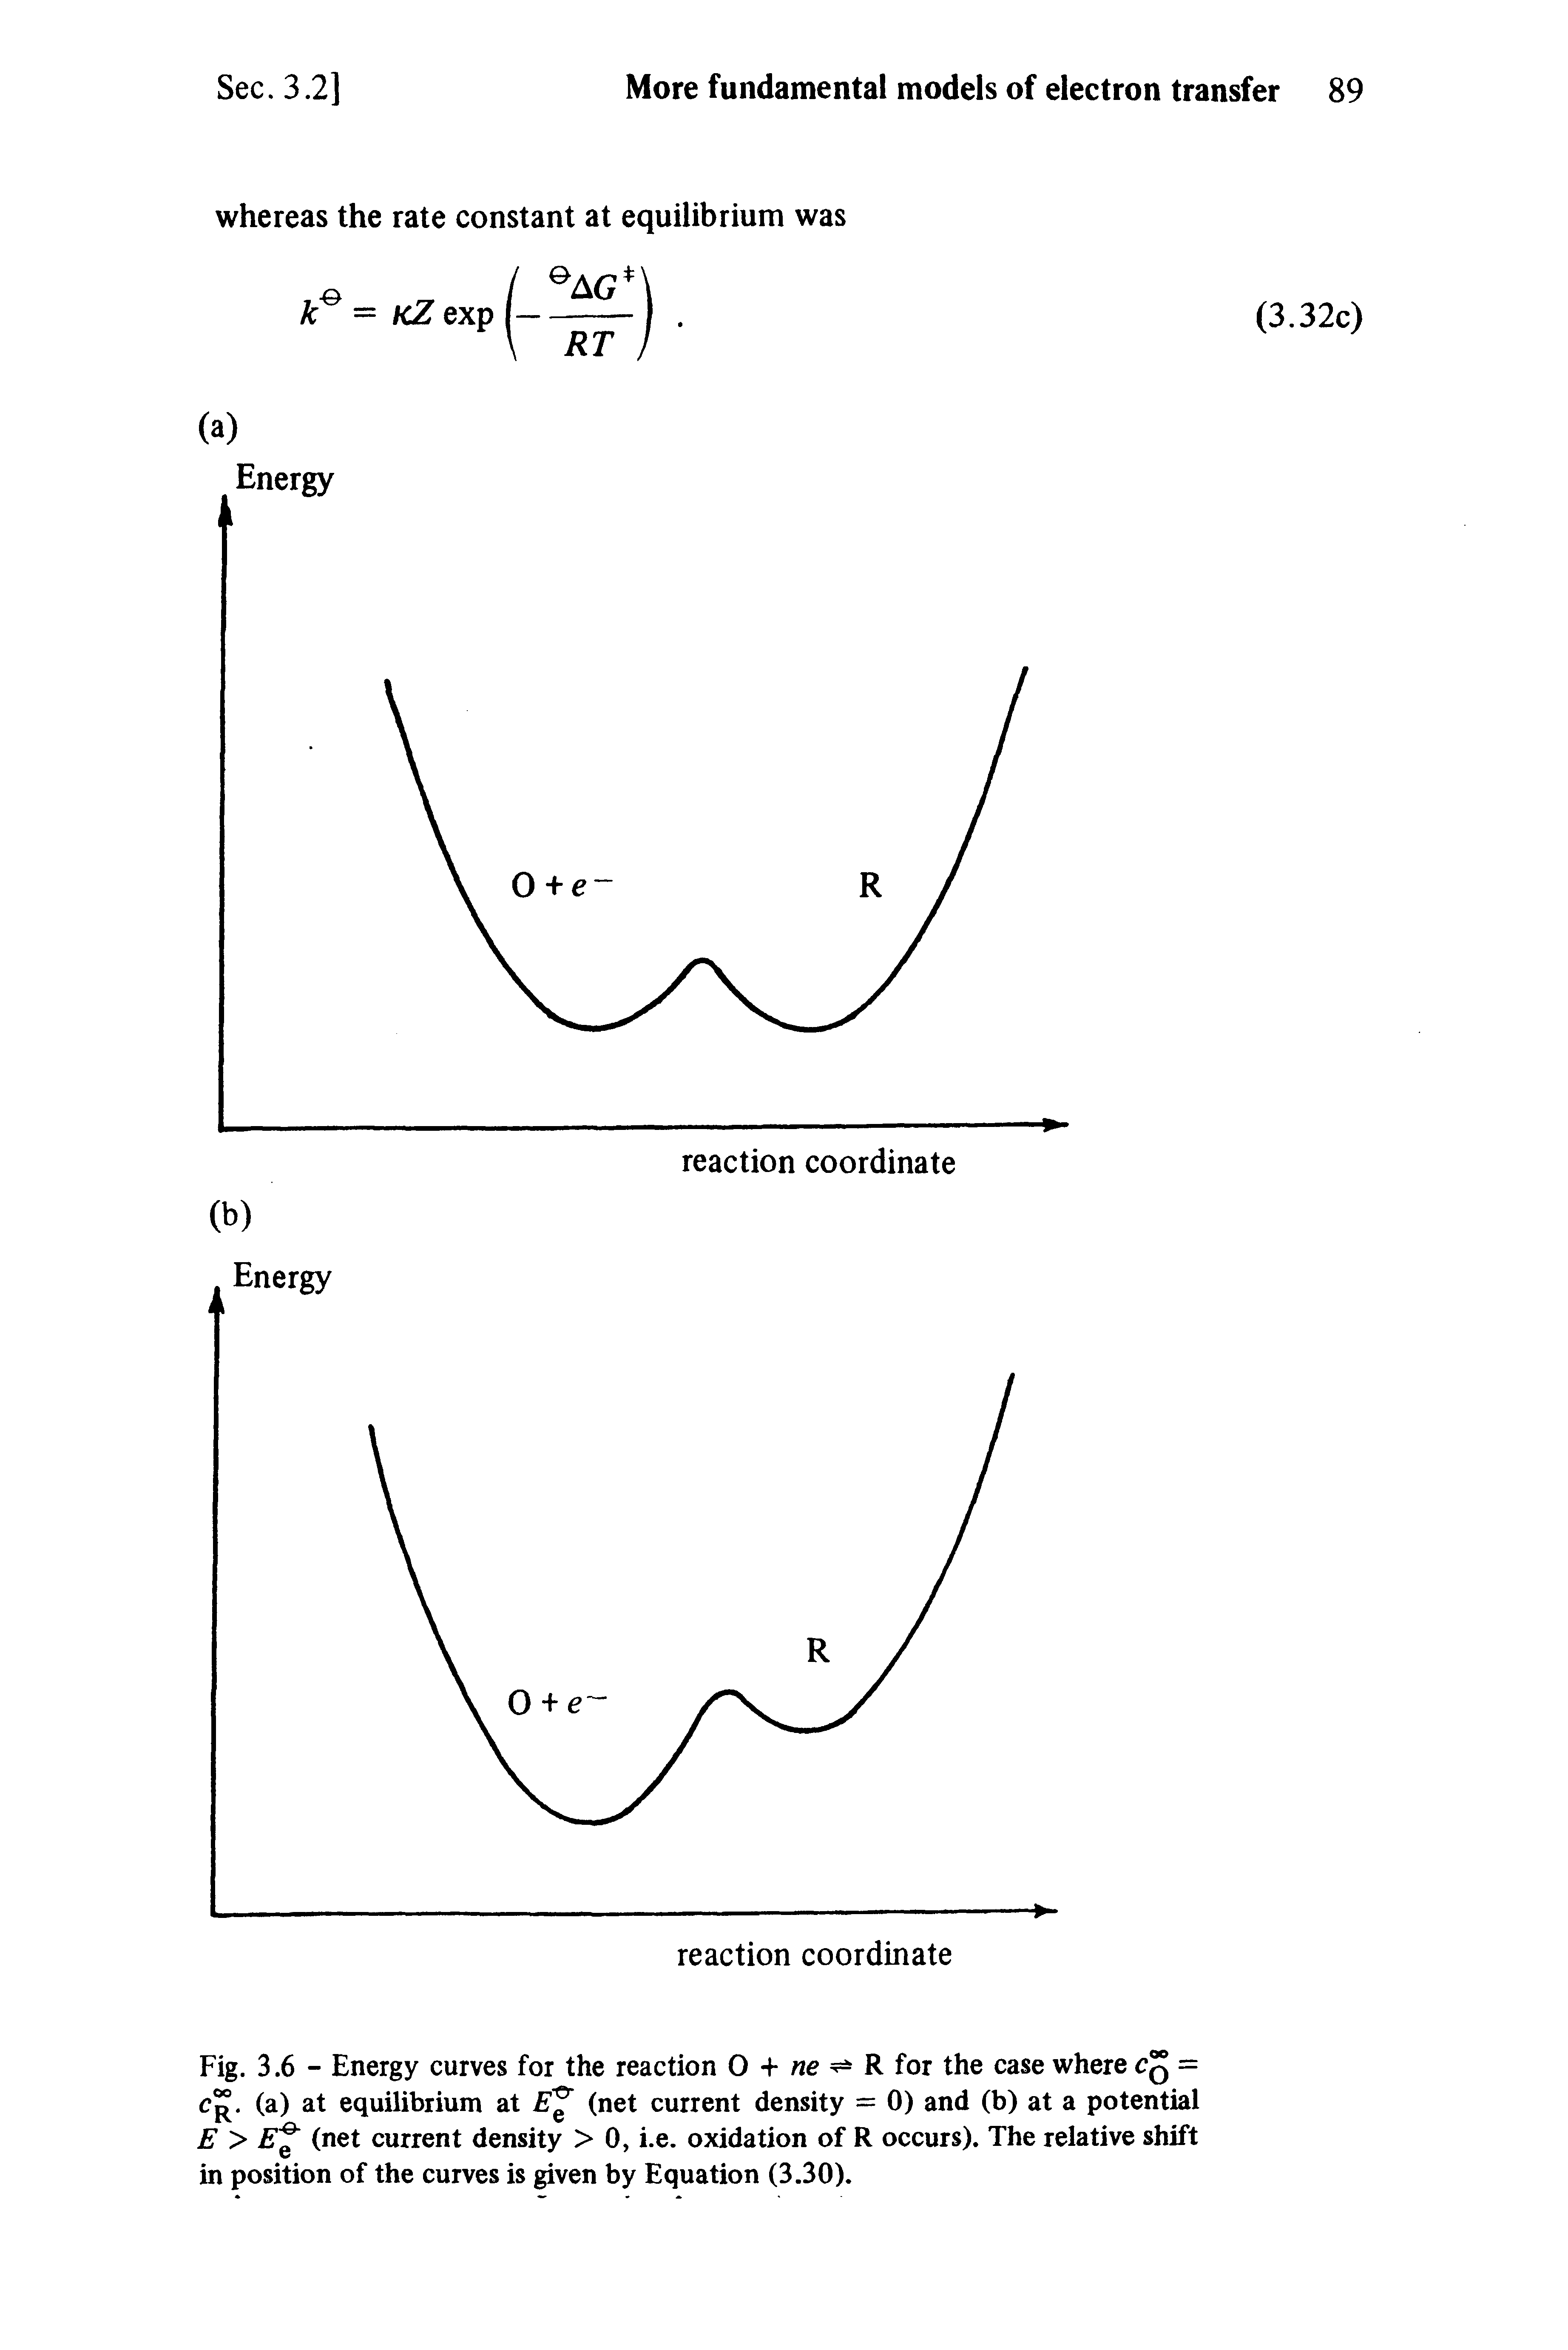 Fig. 3.6 - Energy curves for the reaction O + R for the case where Cq = c. (a) at equilibrium at (net current density = 0) and (b) at a potential E > E (net current density > 0, i.e. oxidation of R occurs). The relative shift in position of the curves is given by Equation (3.30).